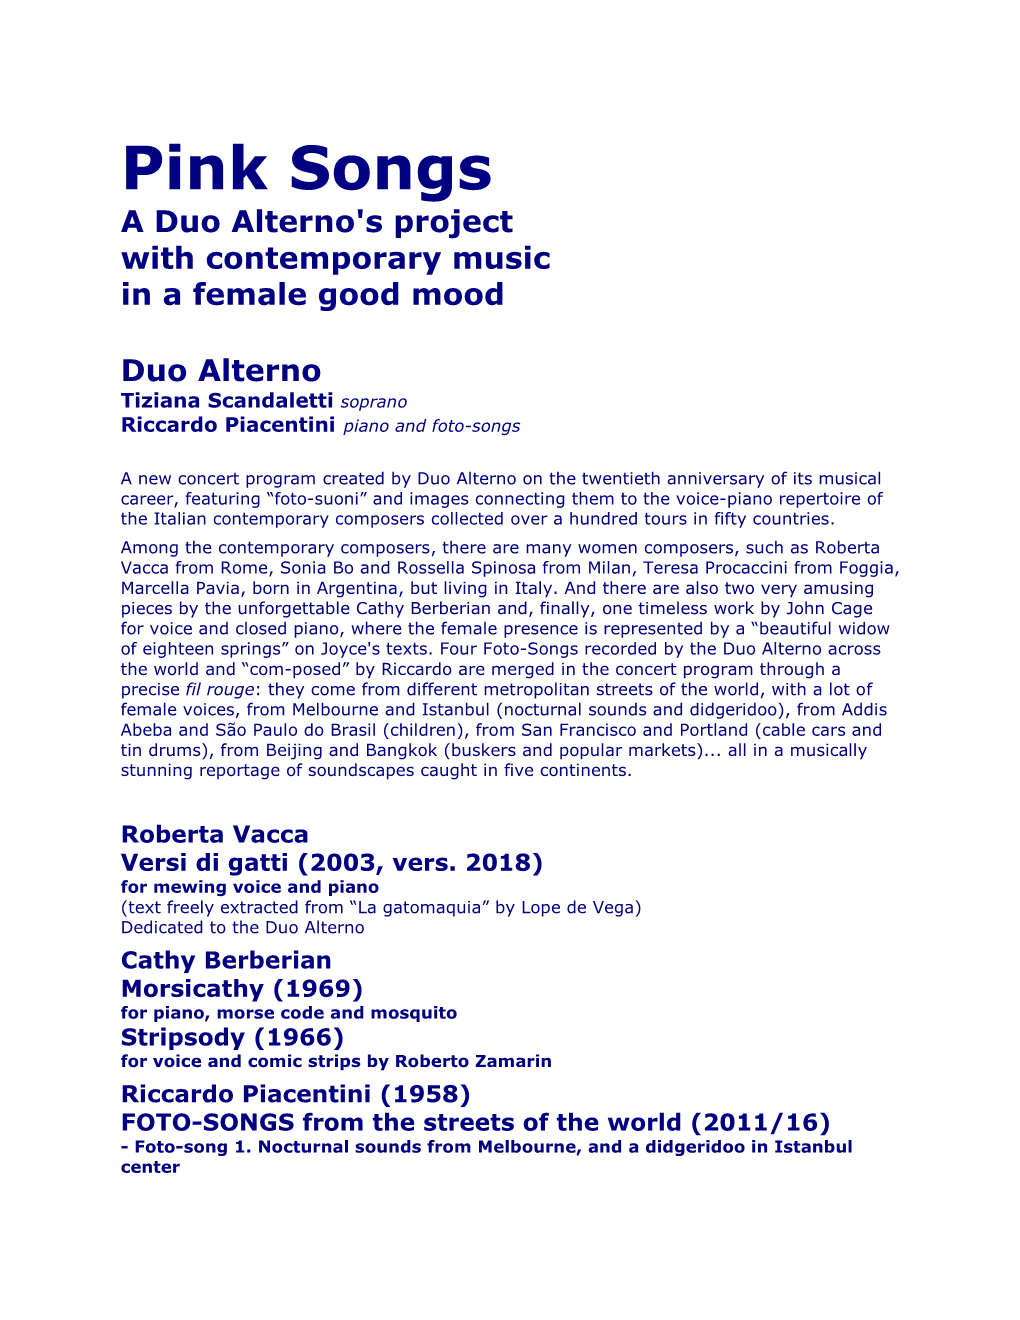 Pink Songs a Duo Alterno's Project with Contemporary Music in a Female Good Mood